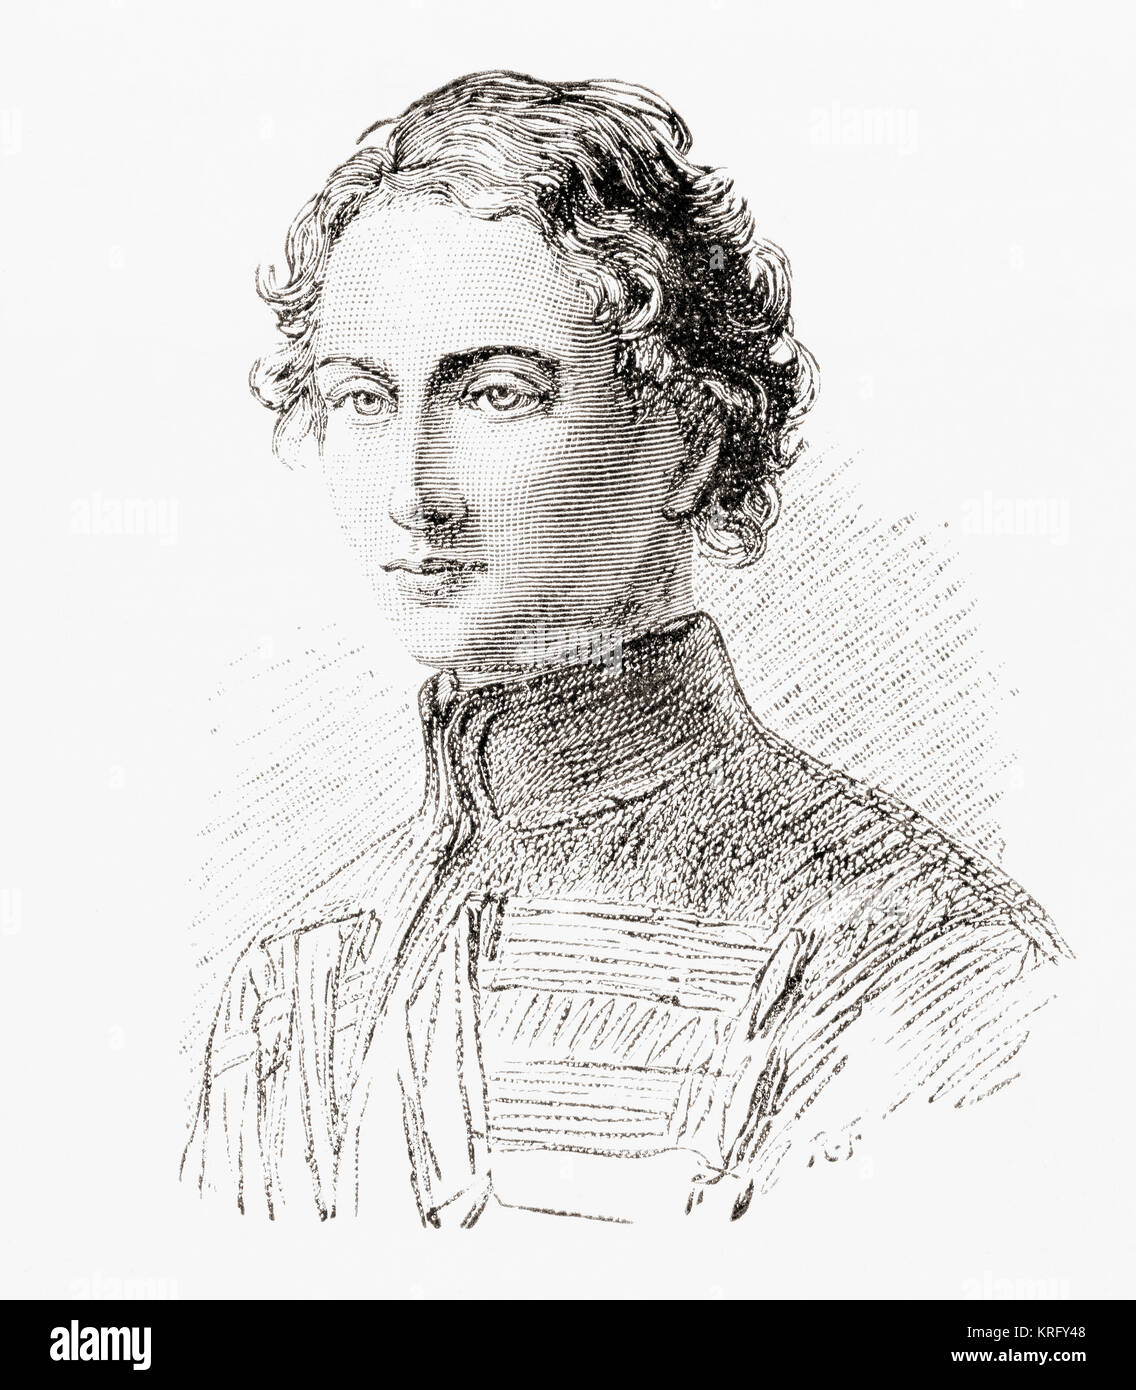 Brigadier General Robert James Loyd-Lindsay, 1st Baron Wantage, 1832 – 1901.  British soldier, politician, philanthropist, benefactor to Wantage, and one of the founders of the British National Society for Aid to the Sick and Wounded in War (later the British Red Cross Society).  Seen here aged 17.  From The Strand Magazine, published January to June 1894. Stock Photo